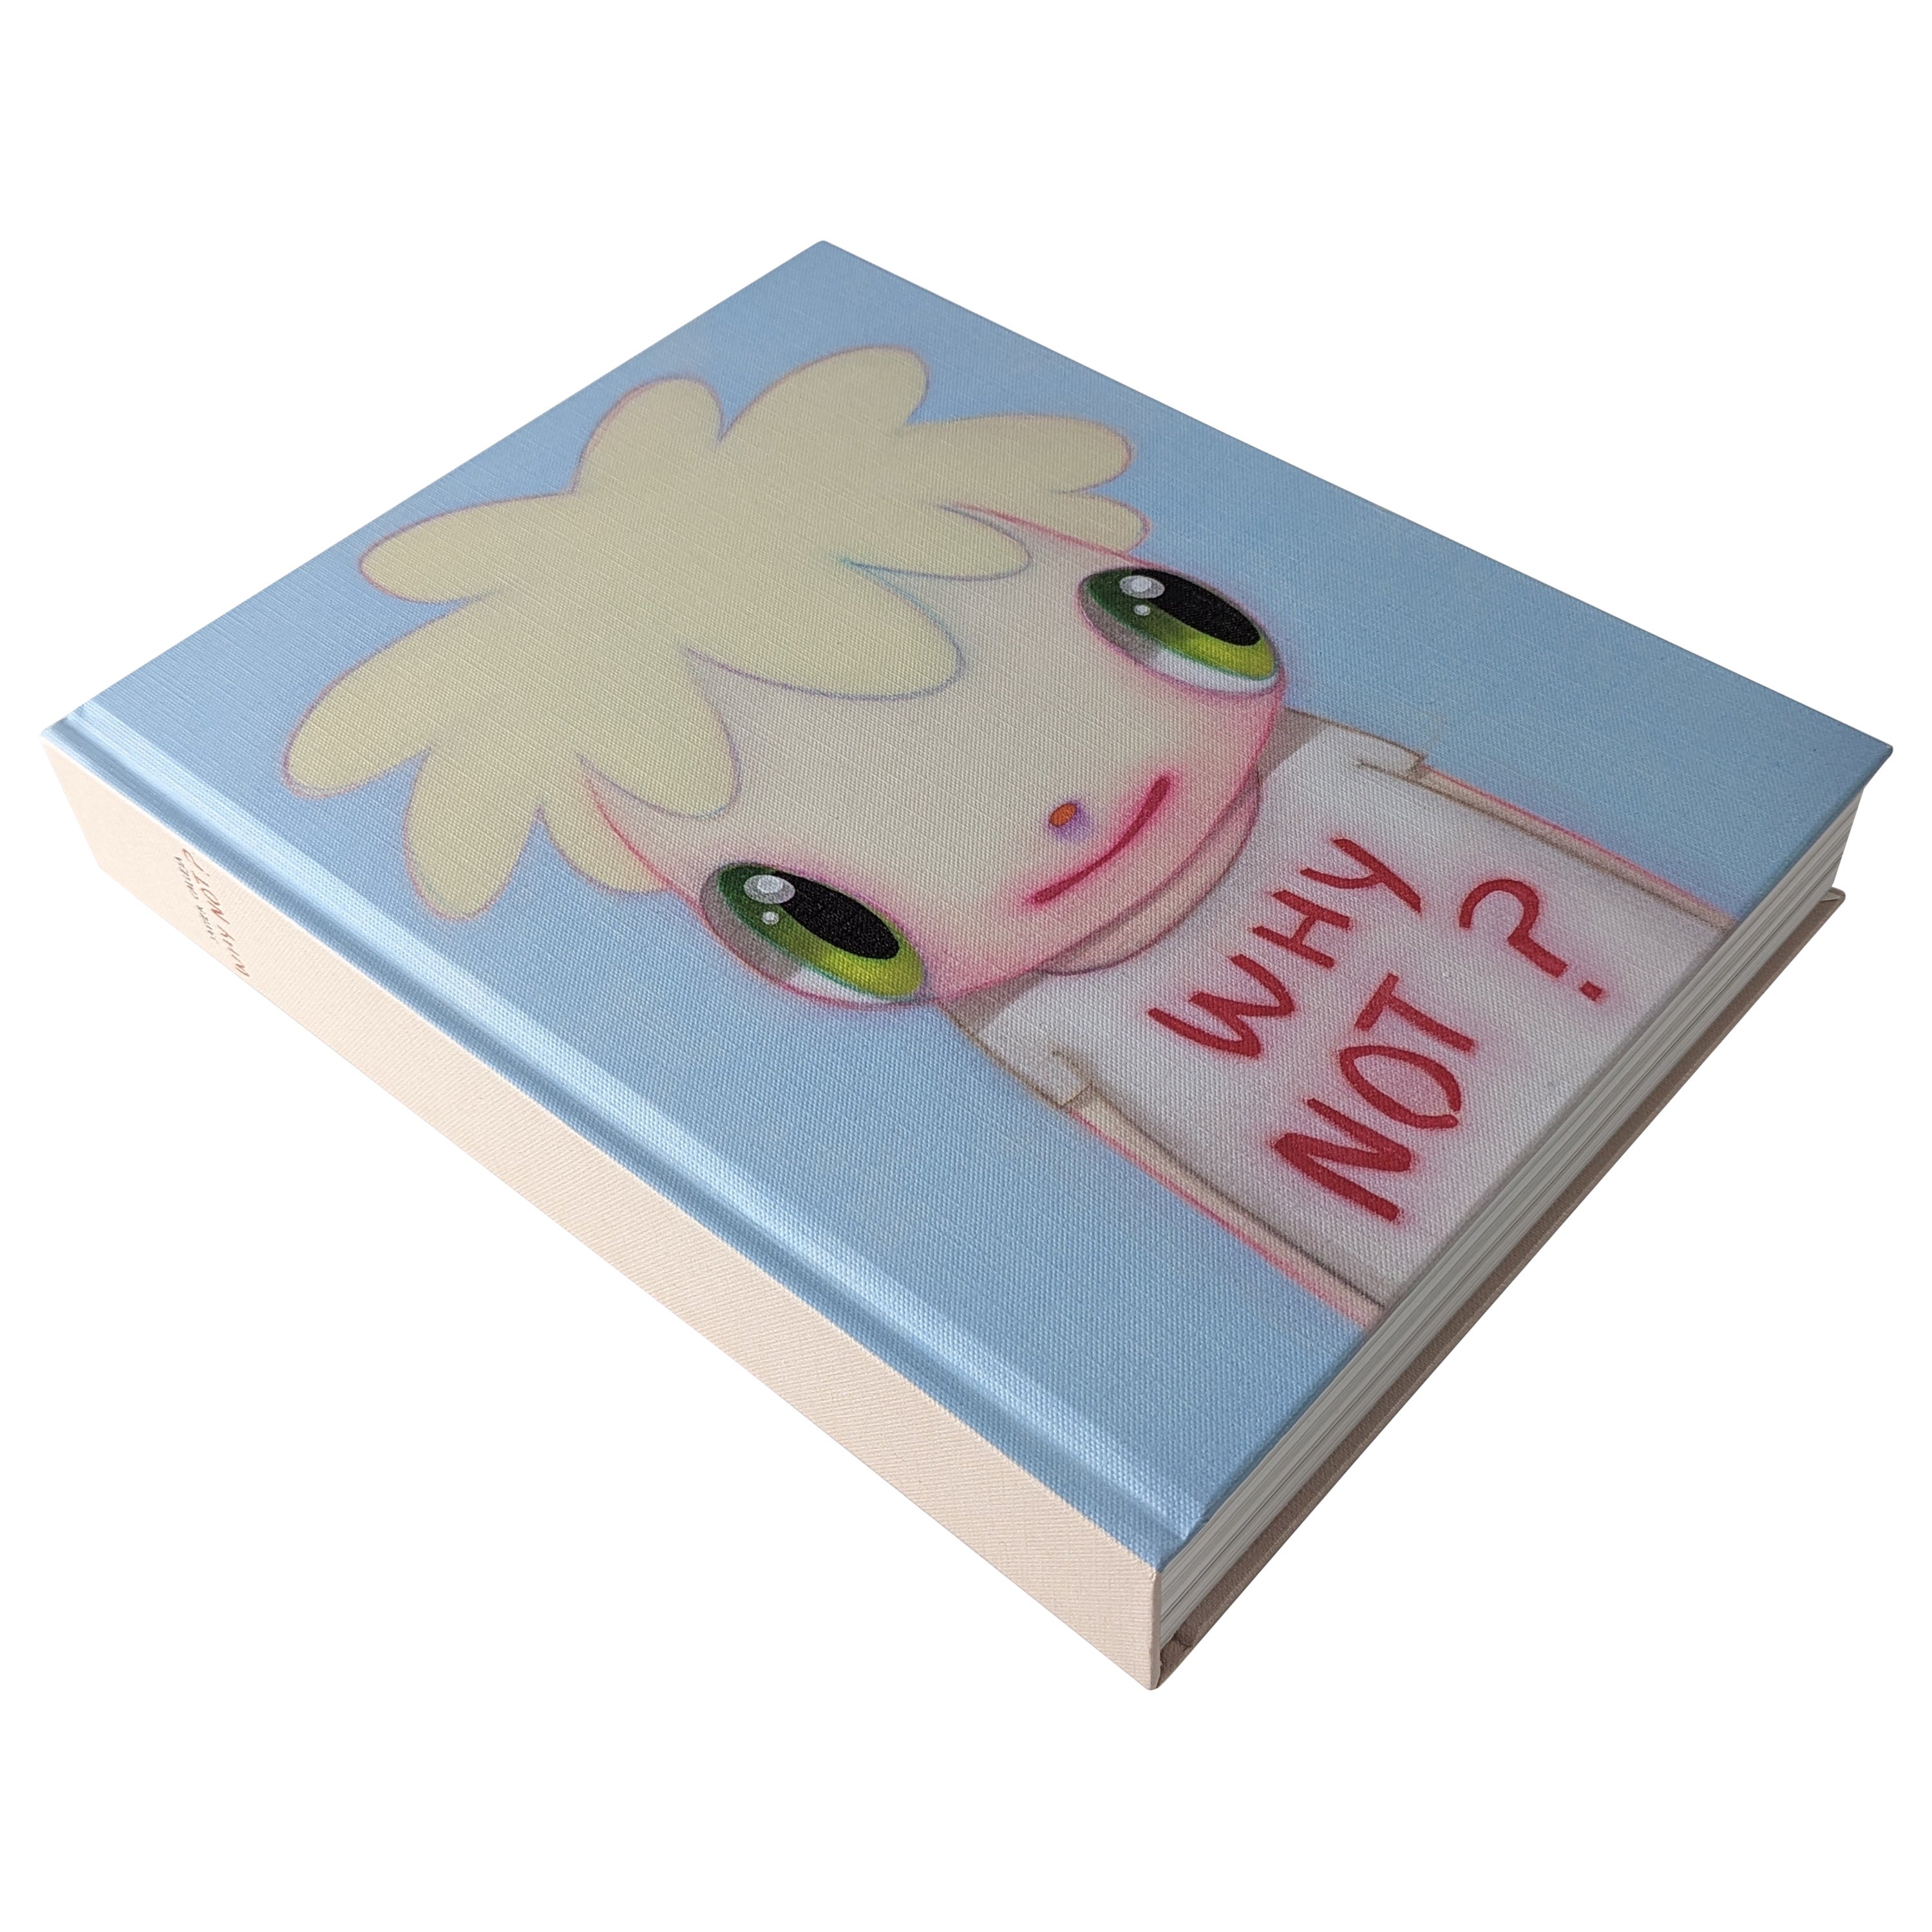 Book Why not? by Javier Calleja for Nanzuka First Edition